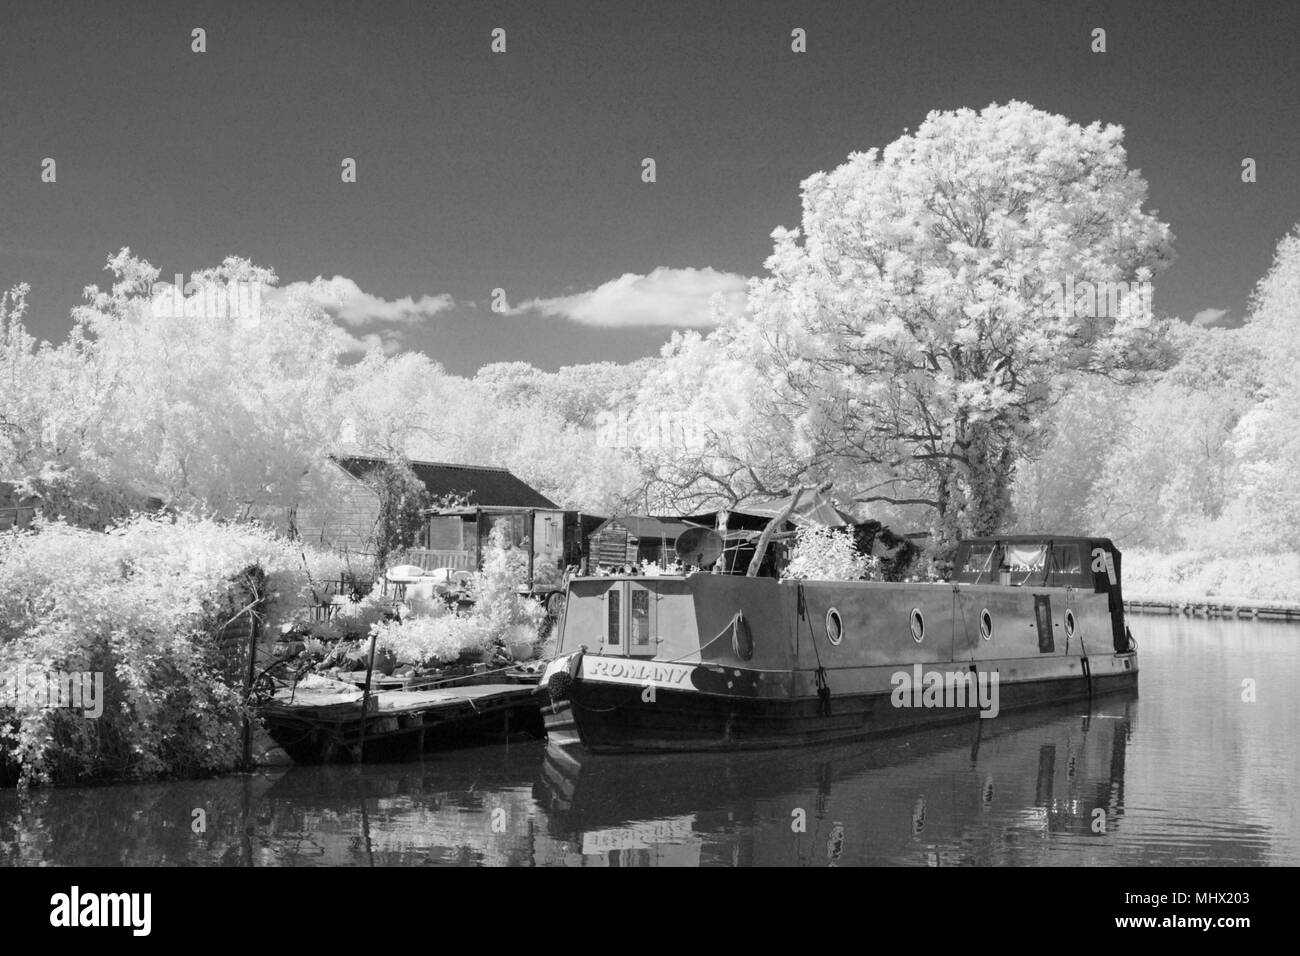 Monochrome infrared image of a pair of narrowboats on the Grand Union Canal, Leighton Buzzard, Bedfordshire, UK. Stock Photo